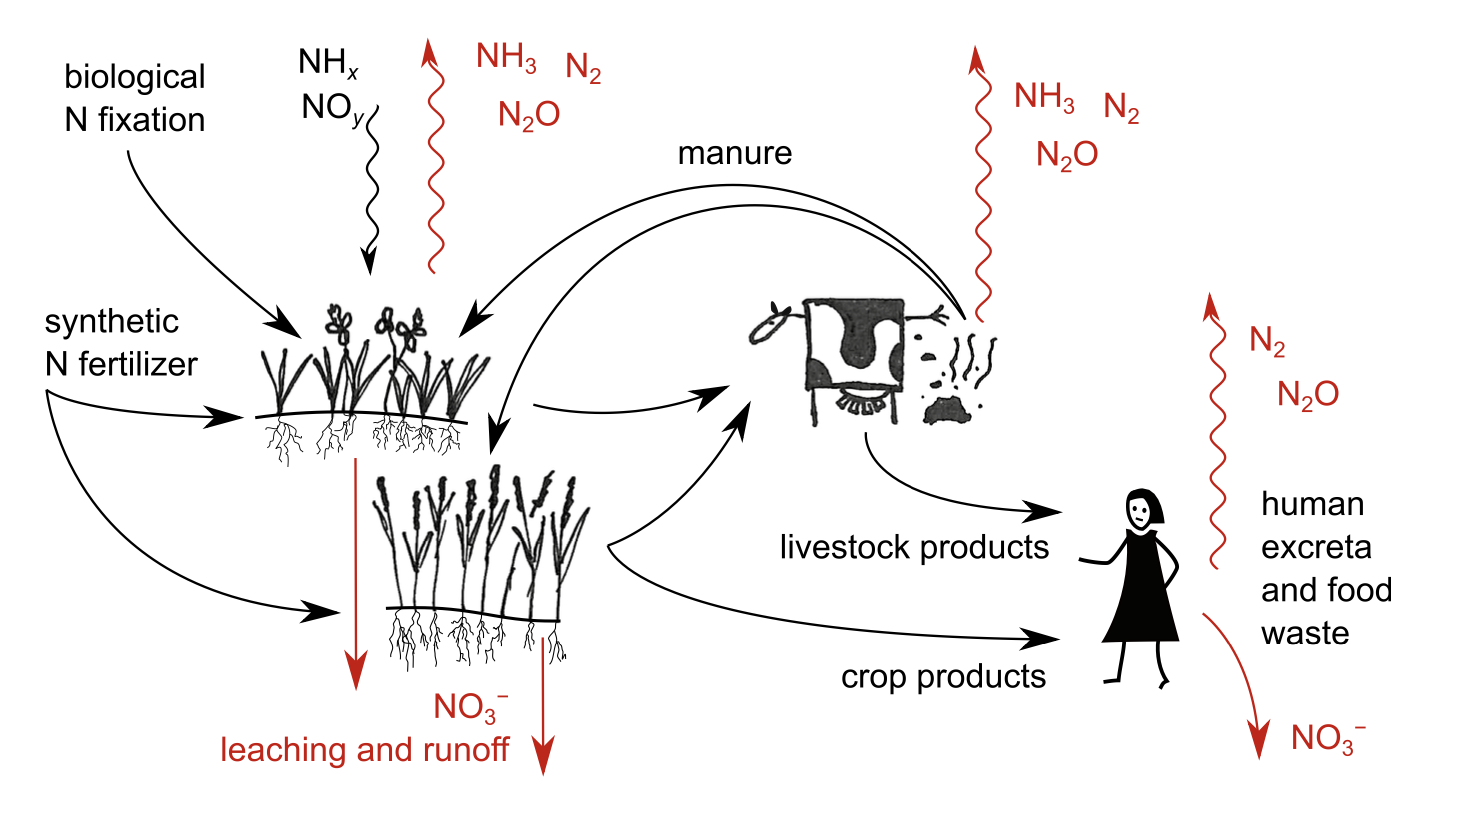 Illustration of the main nitrogen (N) flows in the agri-food system. The soil-plant system receives recycled N, mainly in manure, and new N, mainly in synthetic fertilizers and through biological N fixation (BNF). There is also some soil N input through atmospheric deposition (NH× and NOy in the diagram). Plant N is directly consumed by humans or transformed by livestock to food products and manure. Emissions of dinitrogen (N2), ammonia (NH3), nitrate (NO3−), nitrogen oxides (NO and NO2, collectively NO×), 